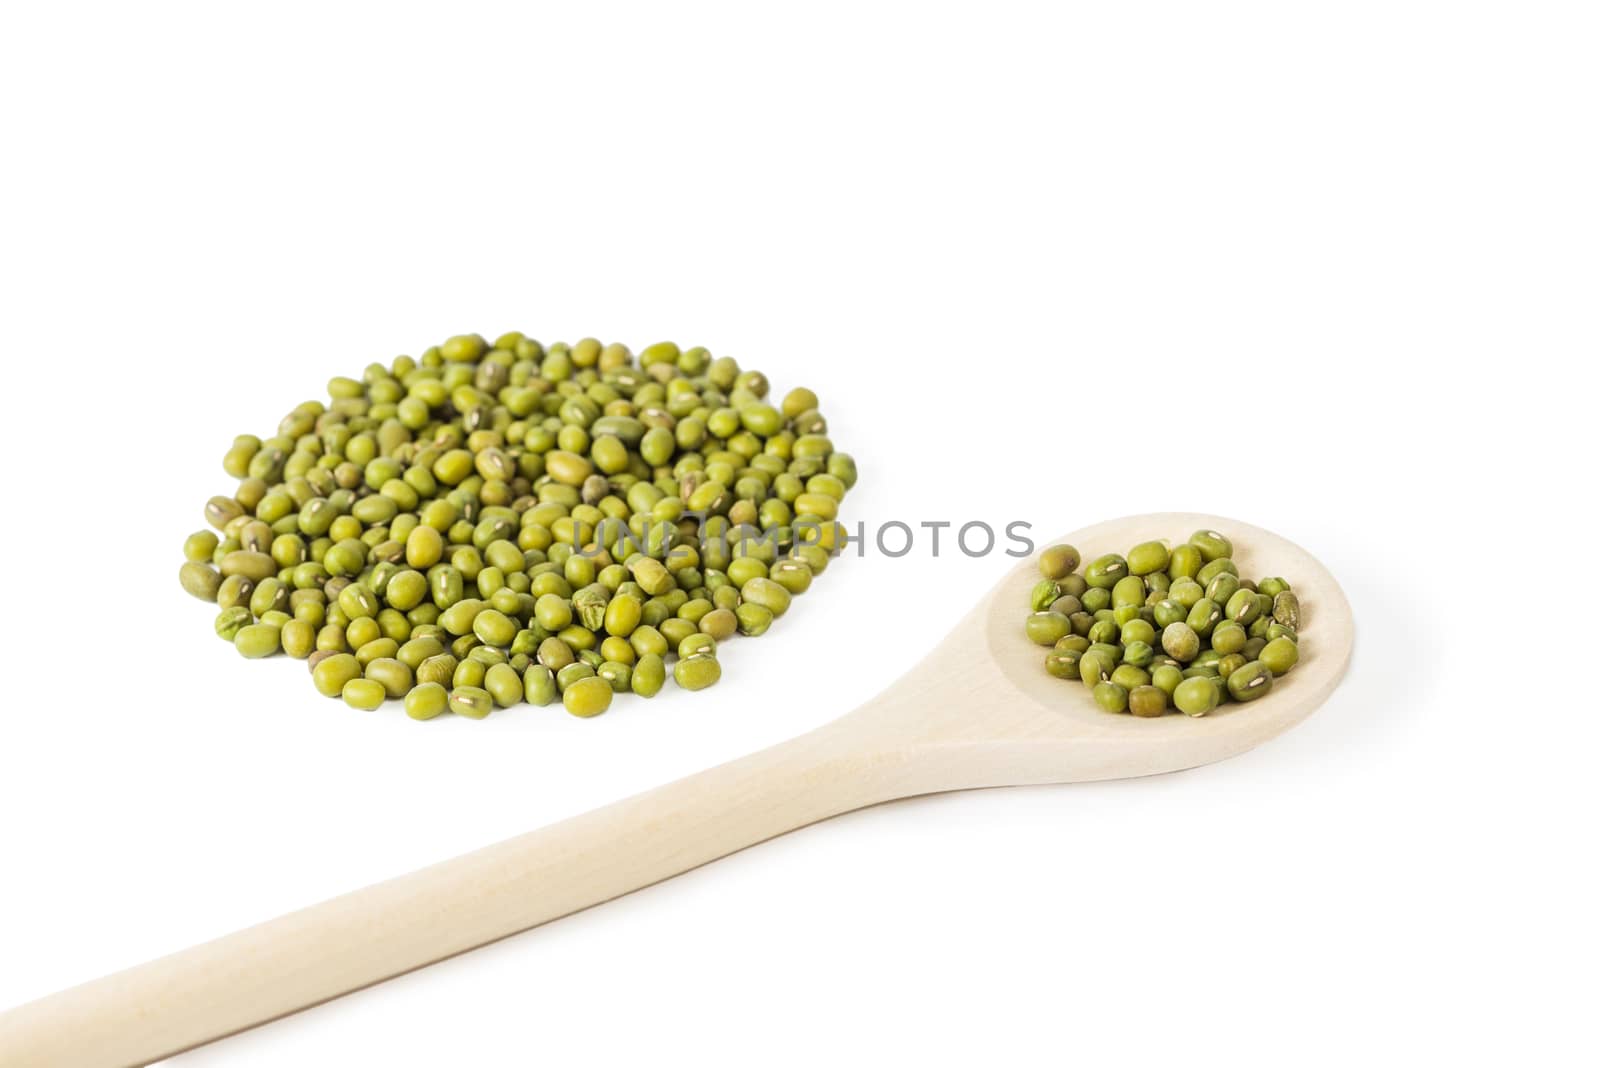 a pile of Raw mung beans Vigna radiata, and mung beans in wooden spoon isolated on white background